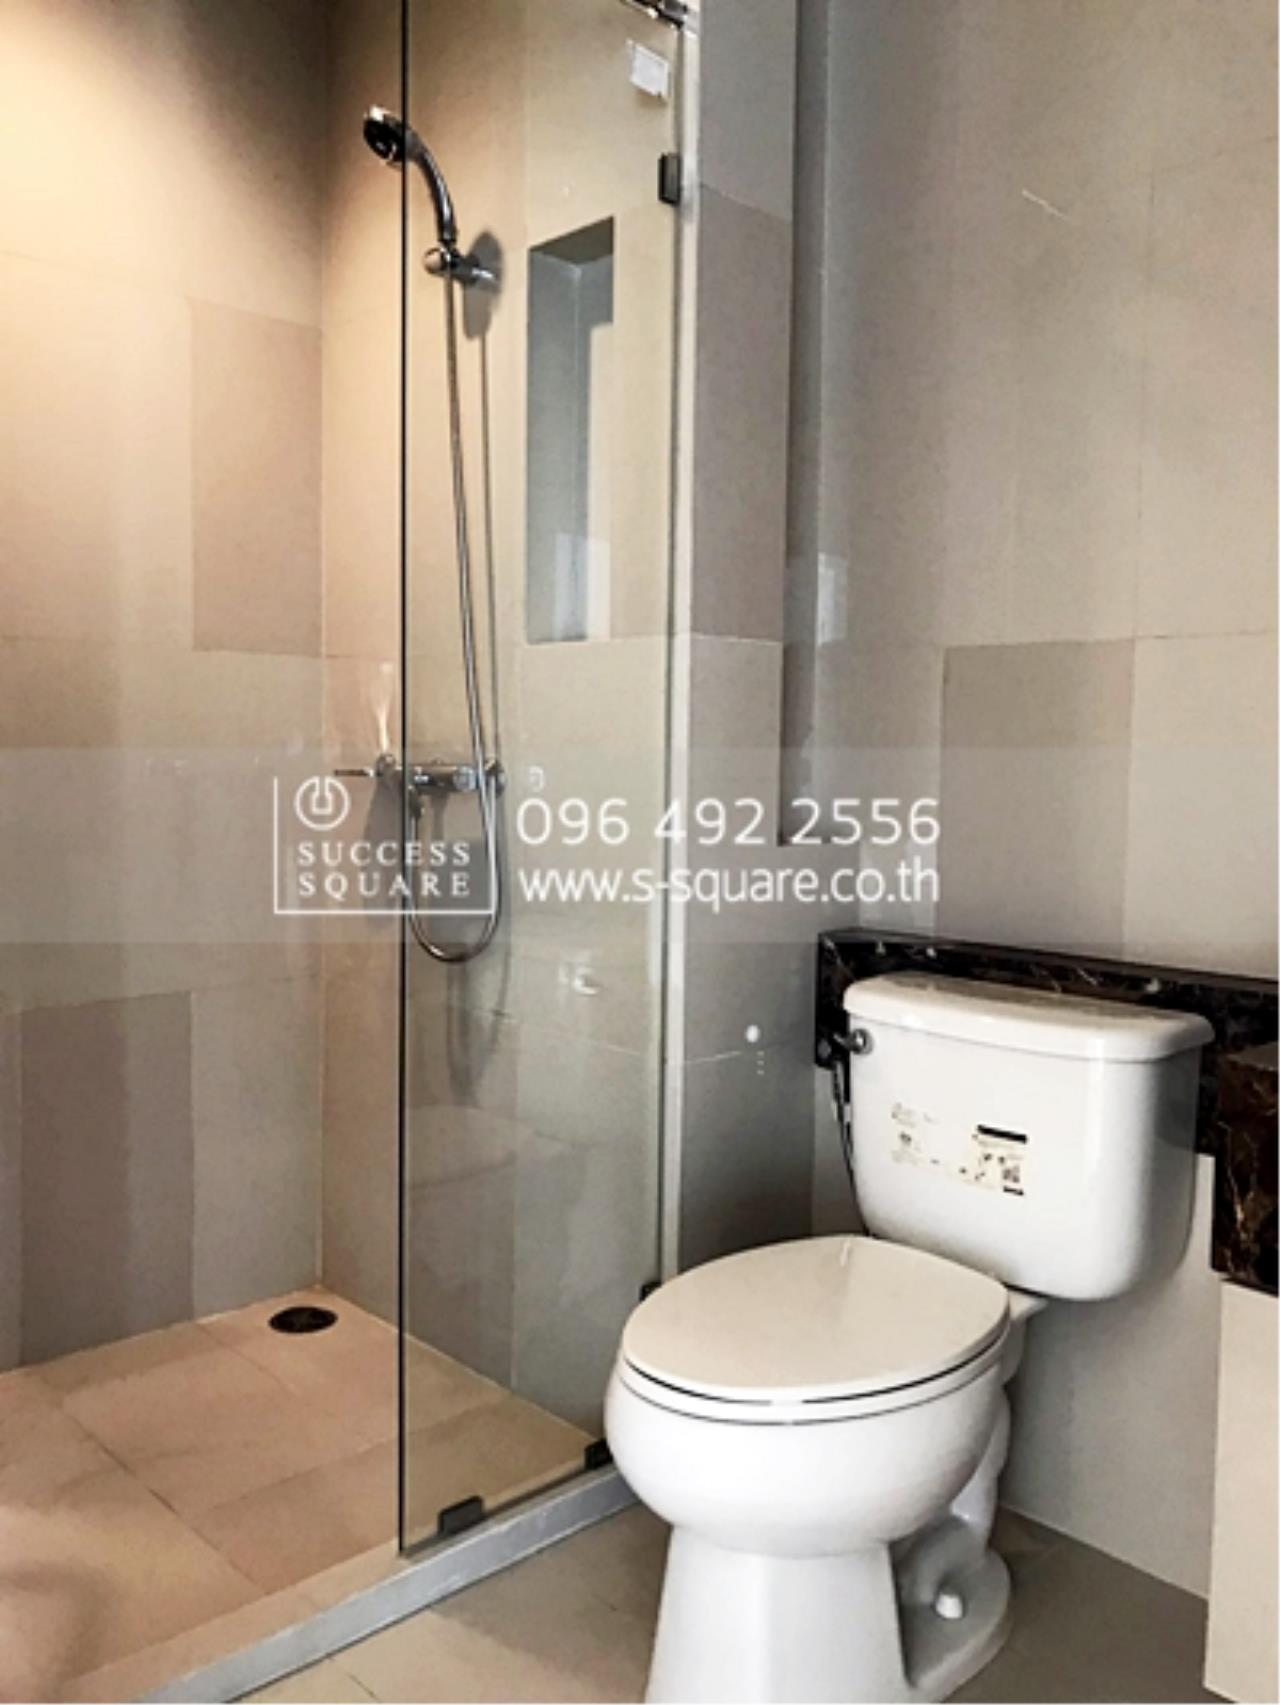 Success Square Agency's Fuse Sathorn-Taksin, Condo For Sale or Rent 1 Bedrooms 1